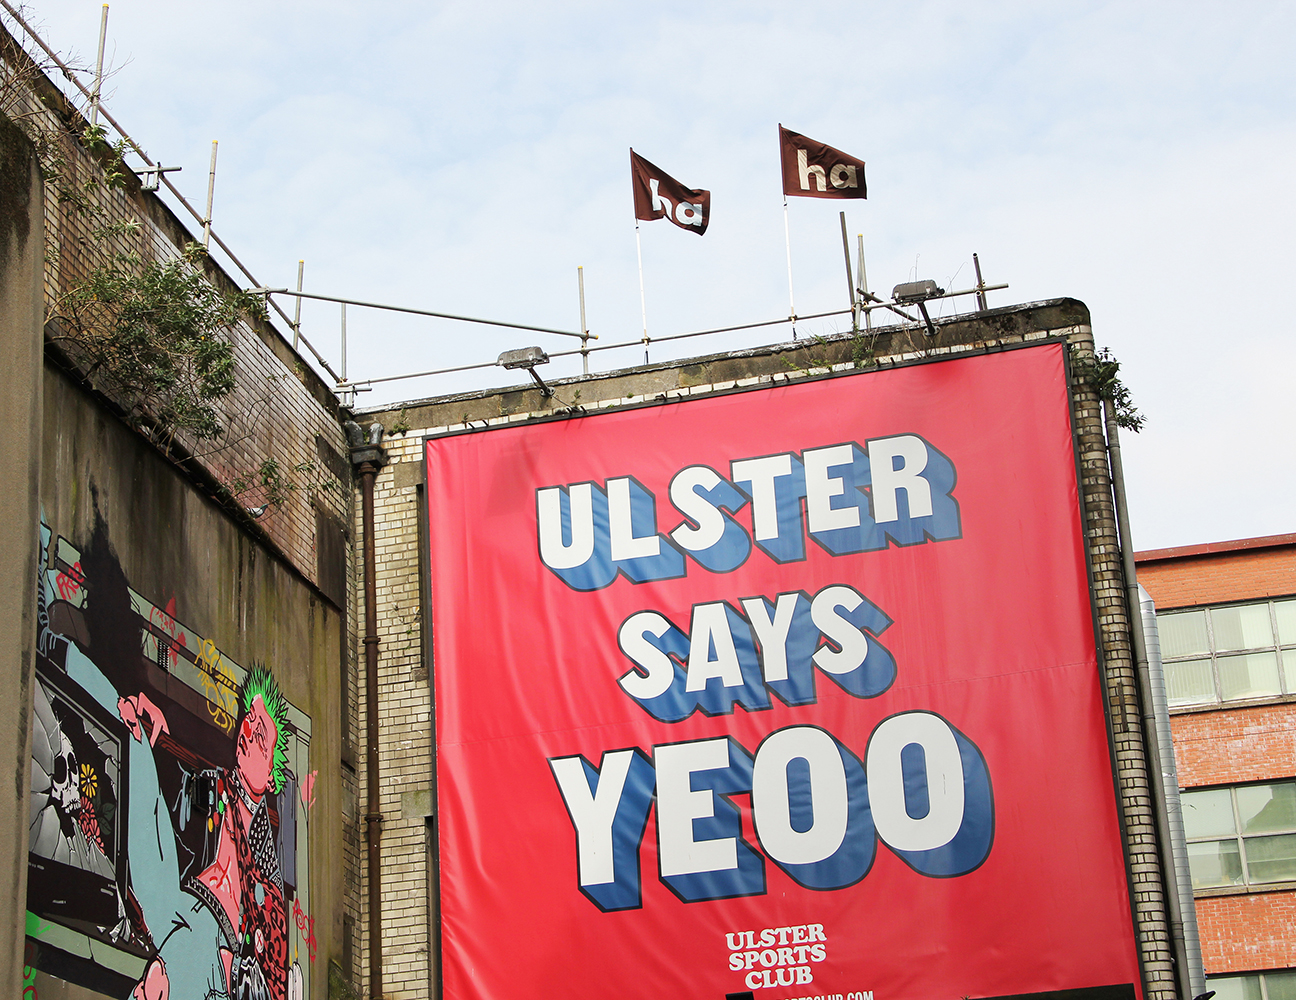 Image of two 'ha ha' flags on the roof above the Ulster Sports Club Bar - above a billboard saying "Ulster Says Yeoo".